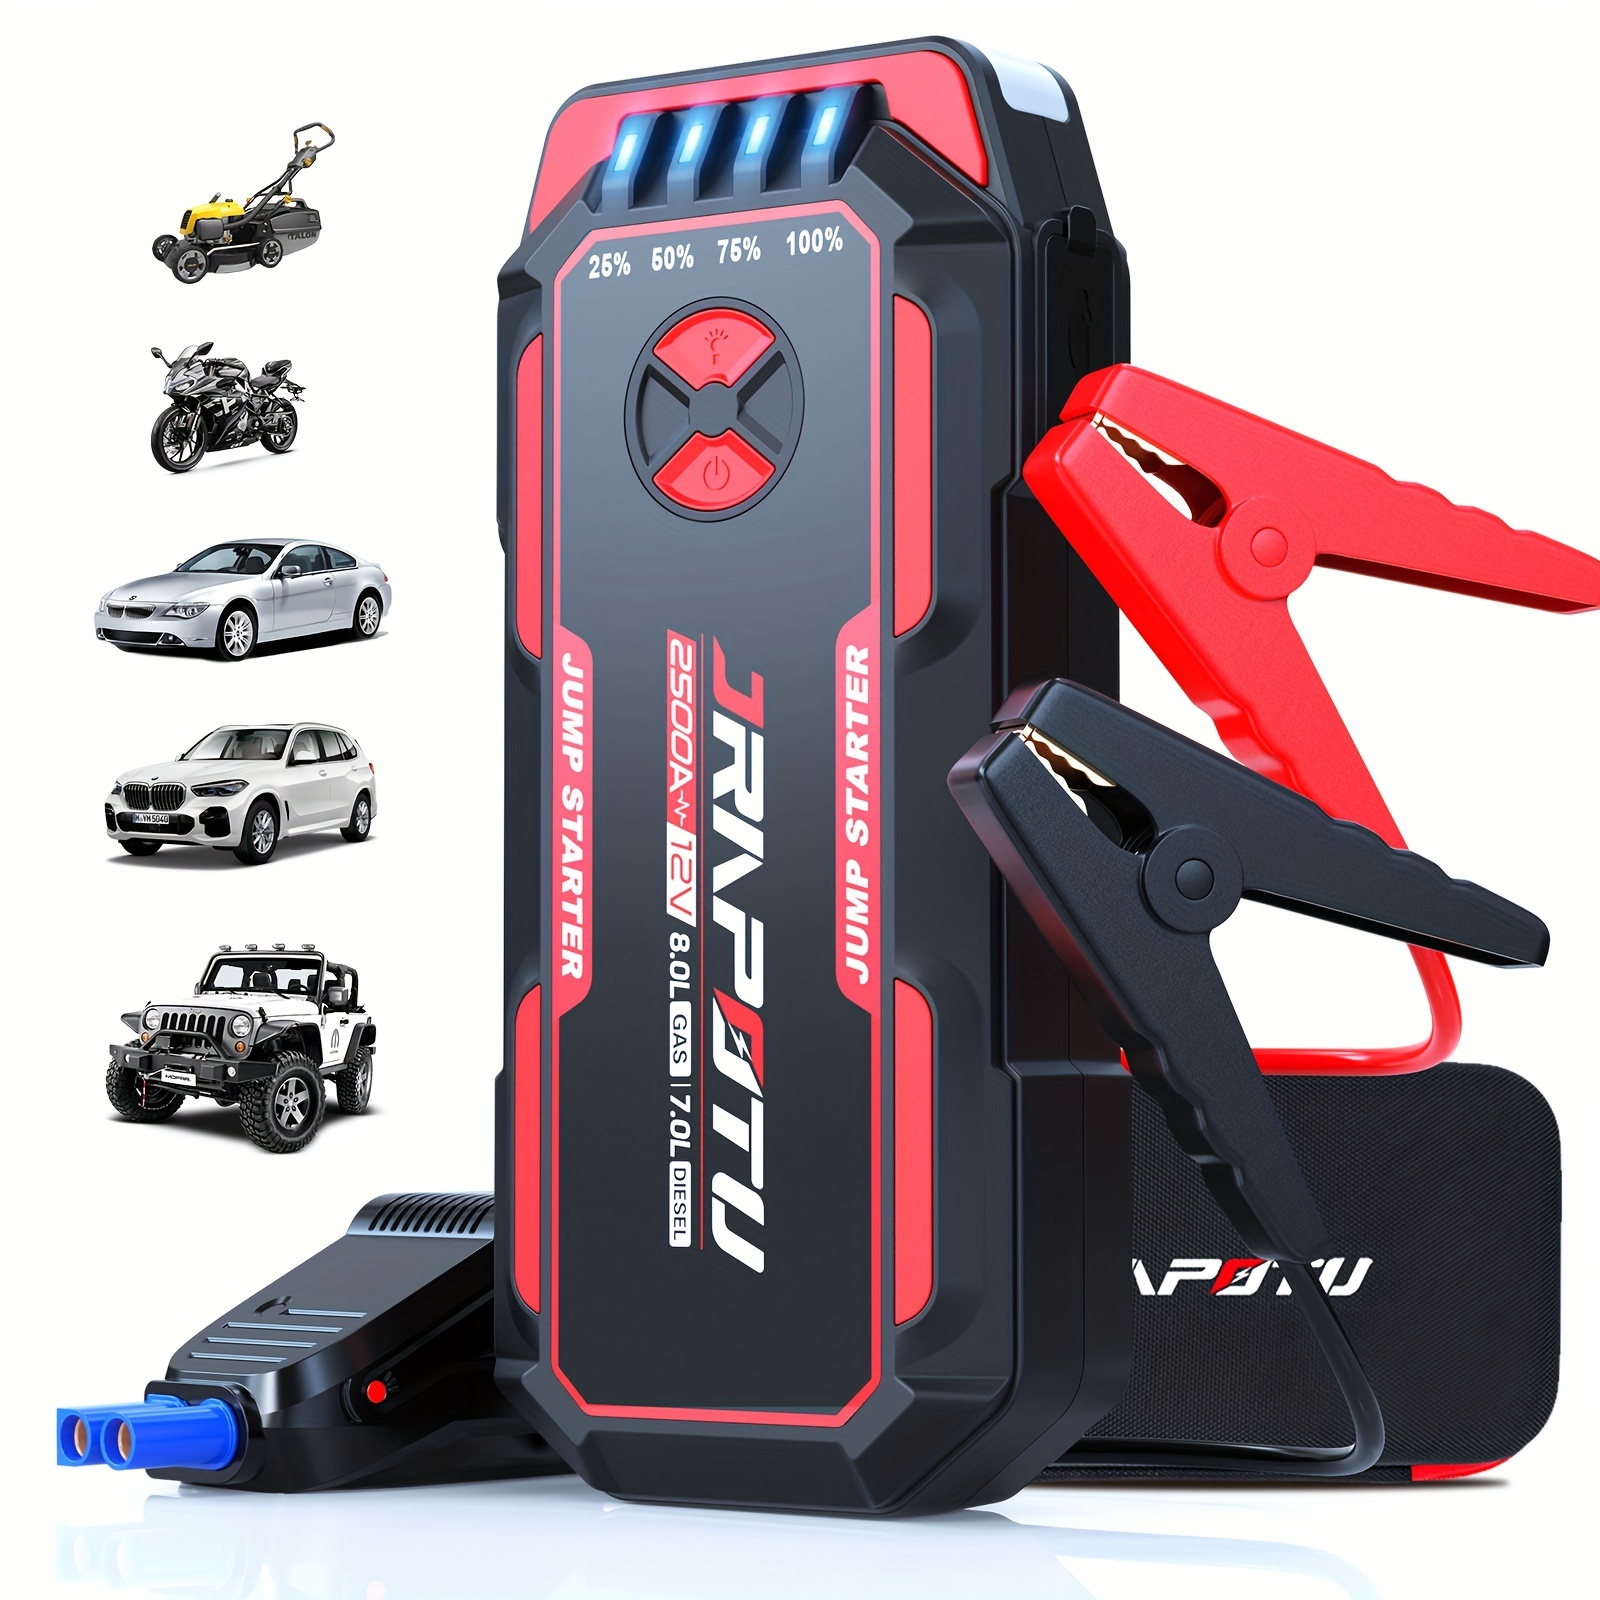 

Portable Car Jump Starter, 2500a Battery Jumper Starter Portable, Jump Box For Car Battery, 12v Portable Jump Starter For 8.0l Gas & 7.0l Cars With Usb Ports & Led Flashlight